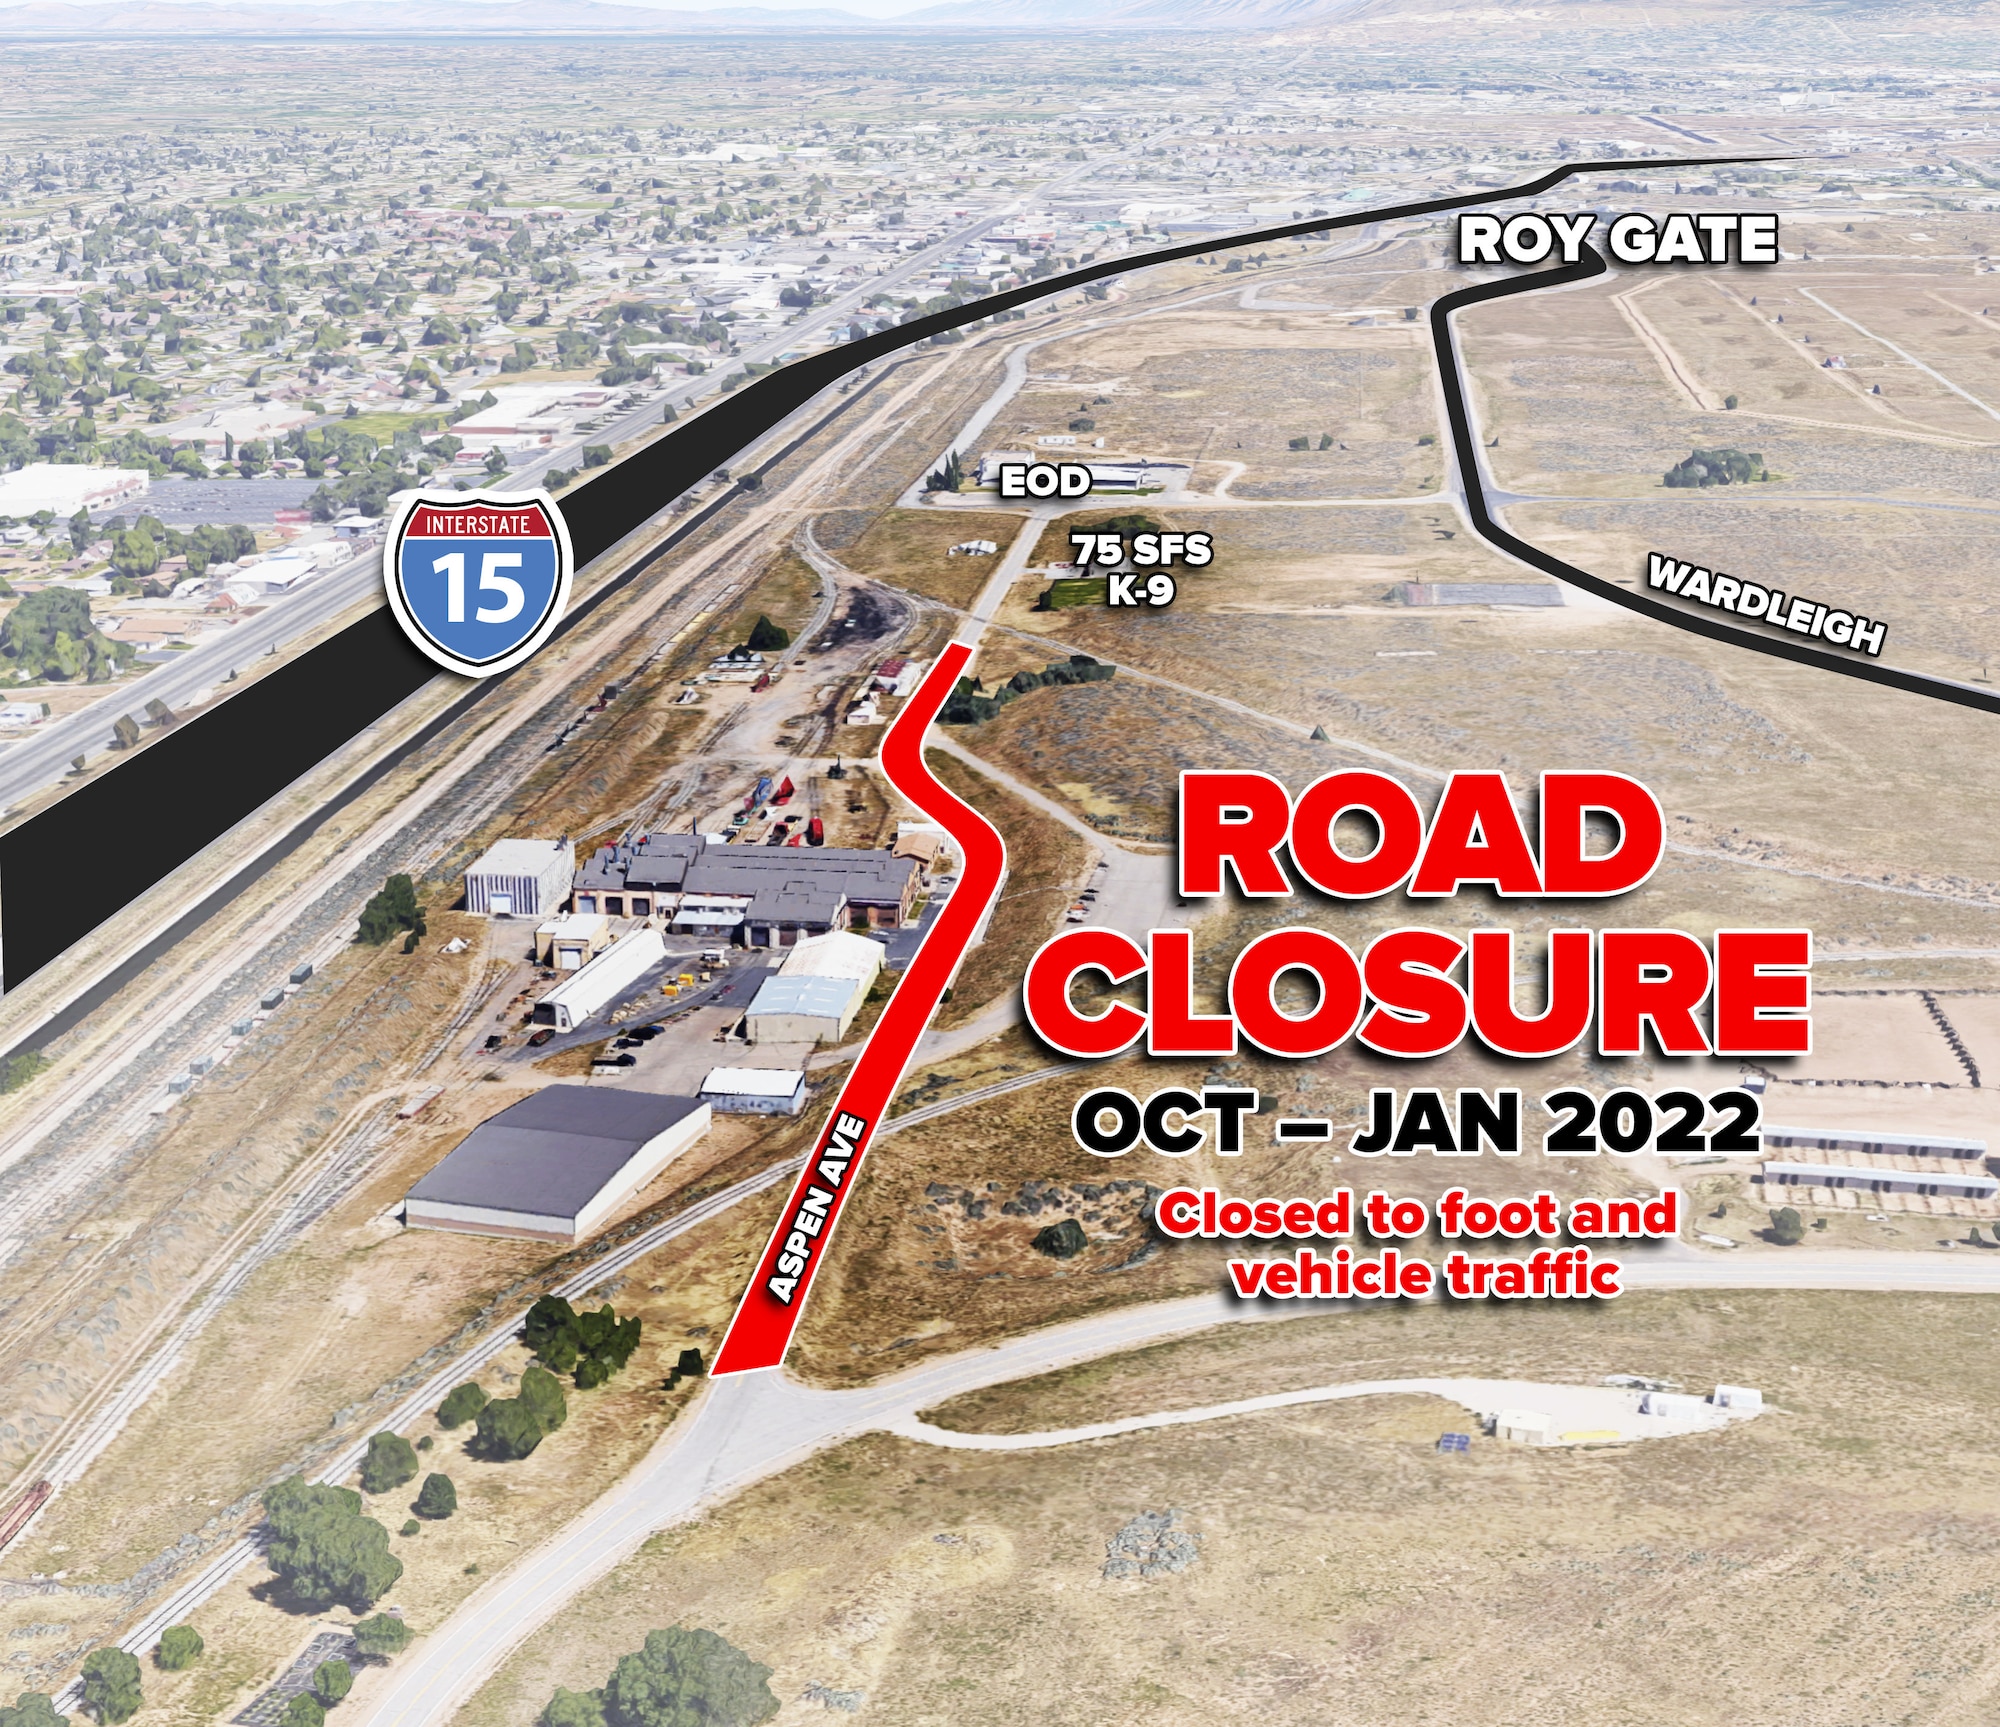 During the DGRC demolition project, Aspen Avenue will be closed to both foot and vehicle traffic.  The road closure is expected to last to January 2022.